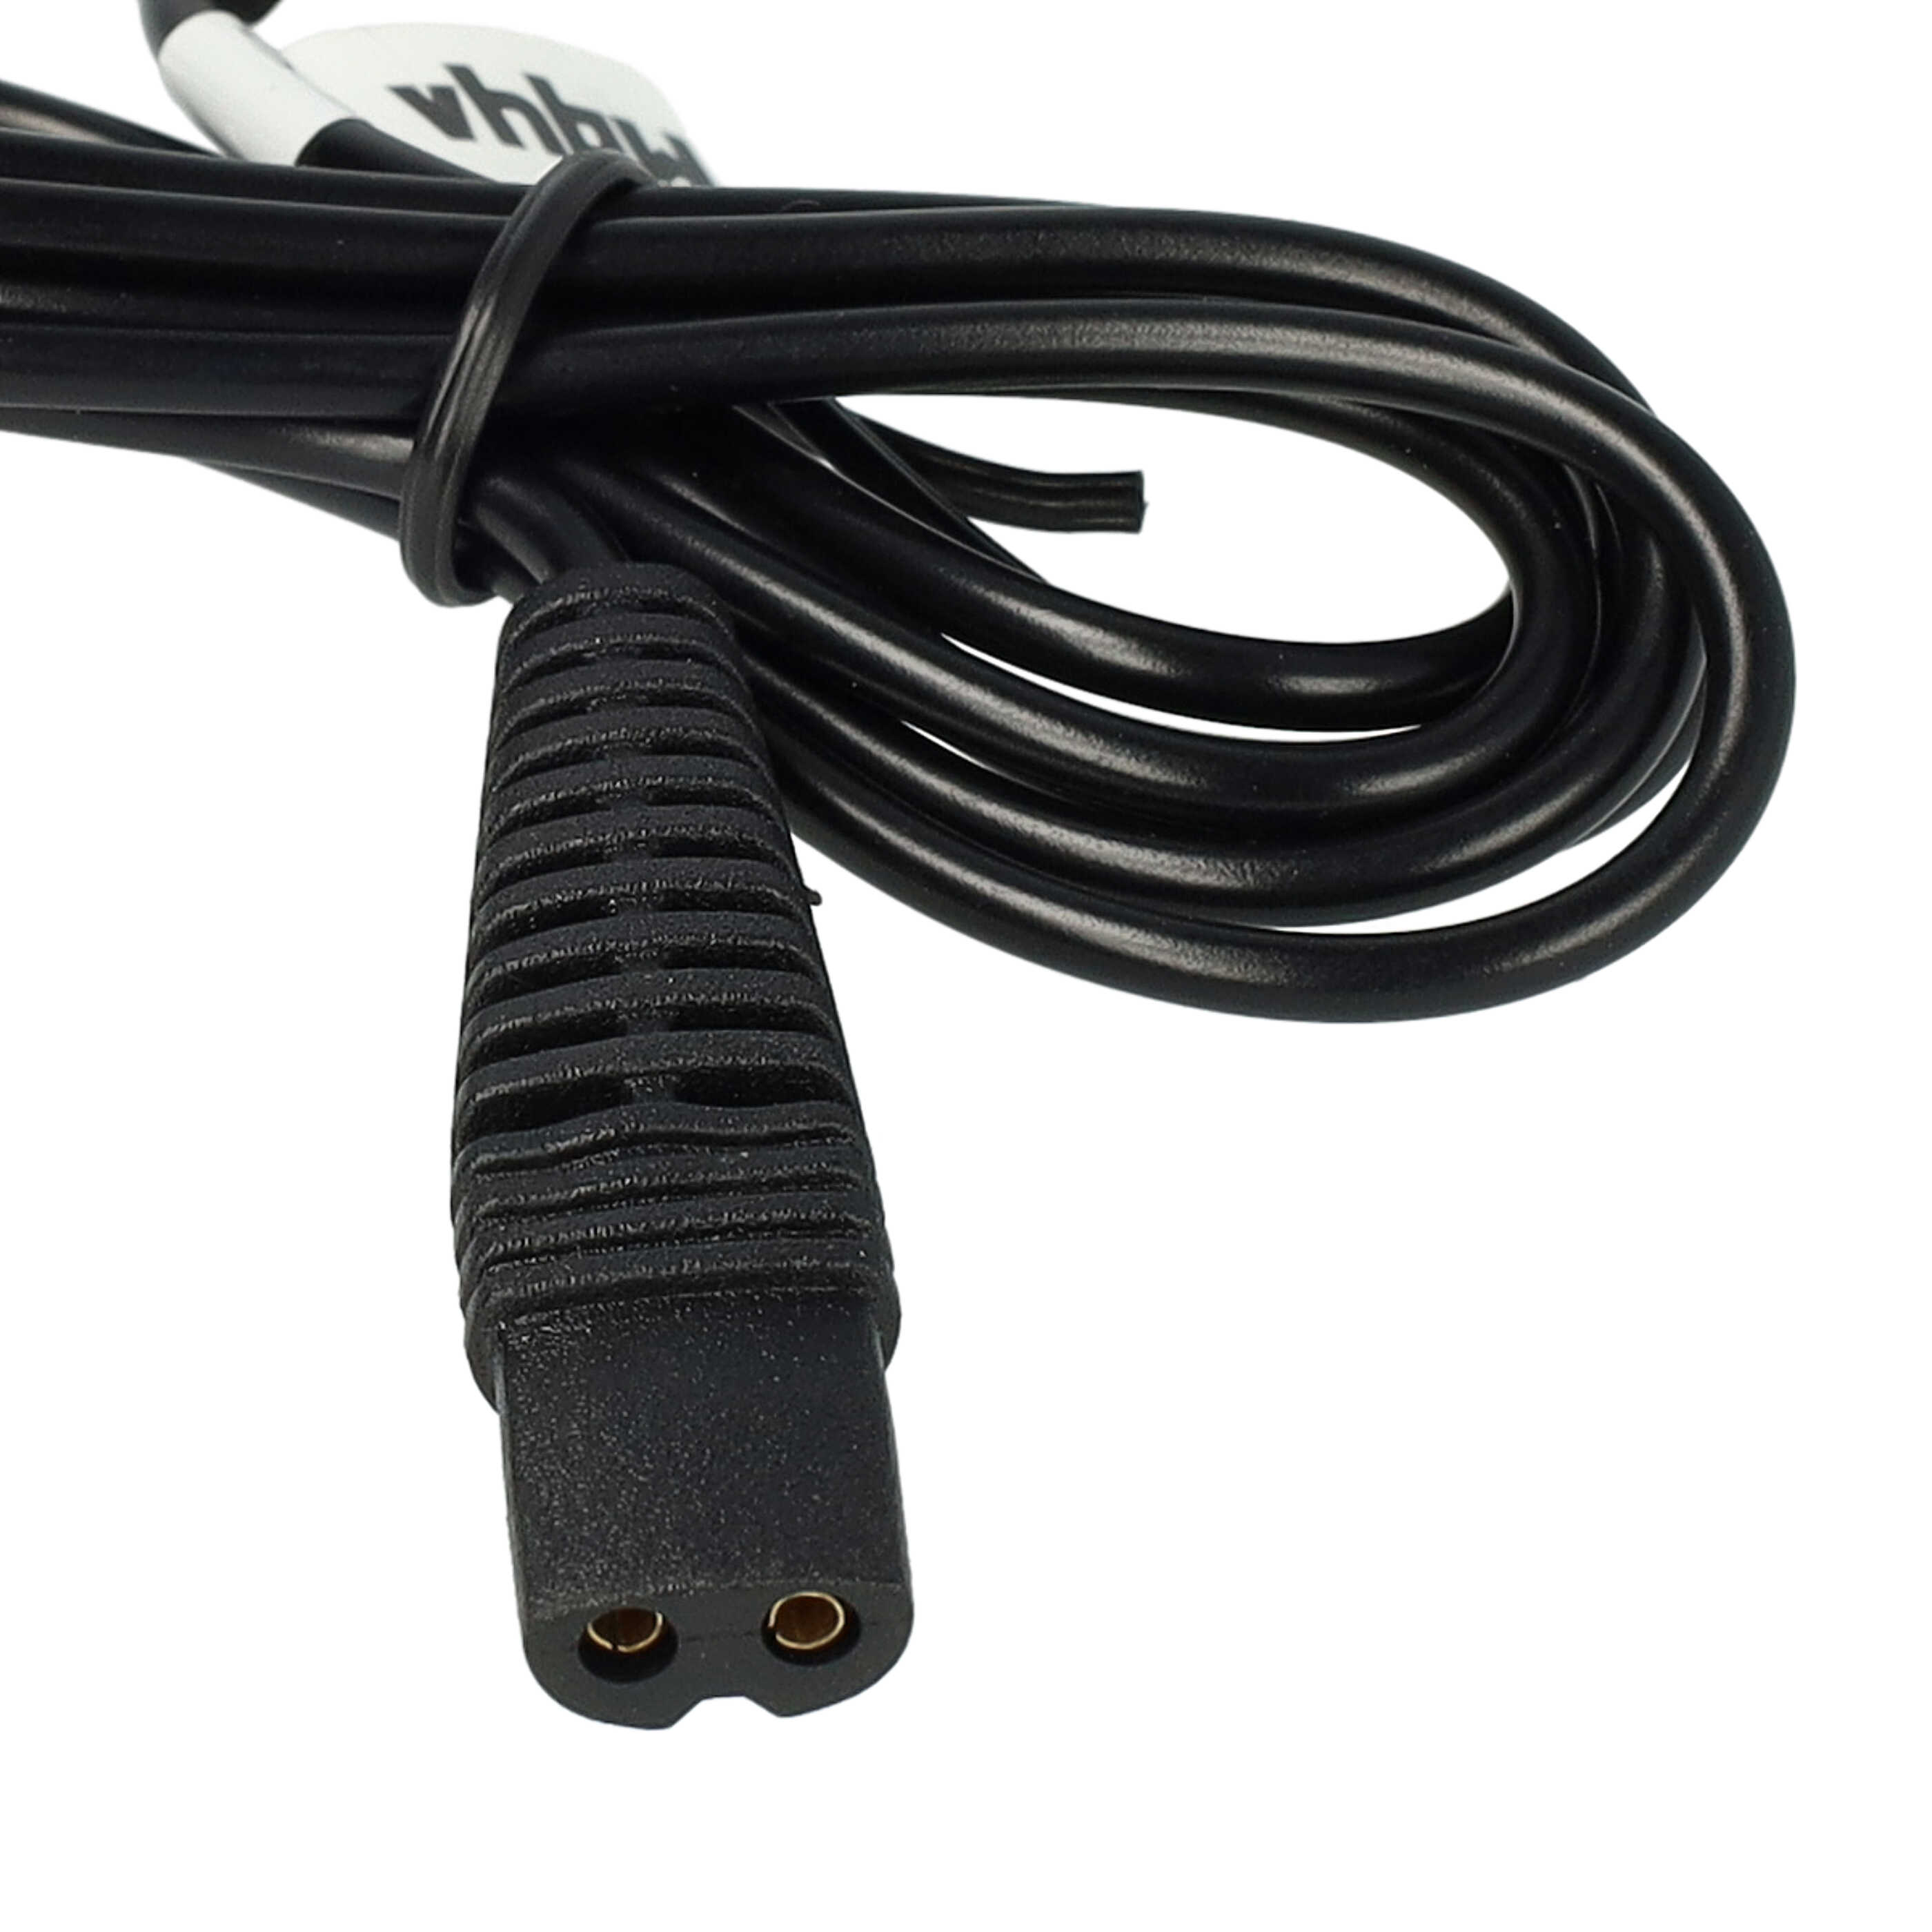 USB Charging Cable suitable for HC20 (5611) Braun, Oral-B HC20 (5611) Shaver, Toothbrush etc. - 120 cm